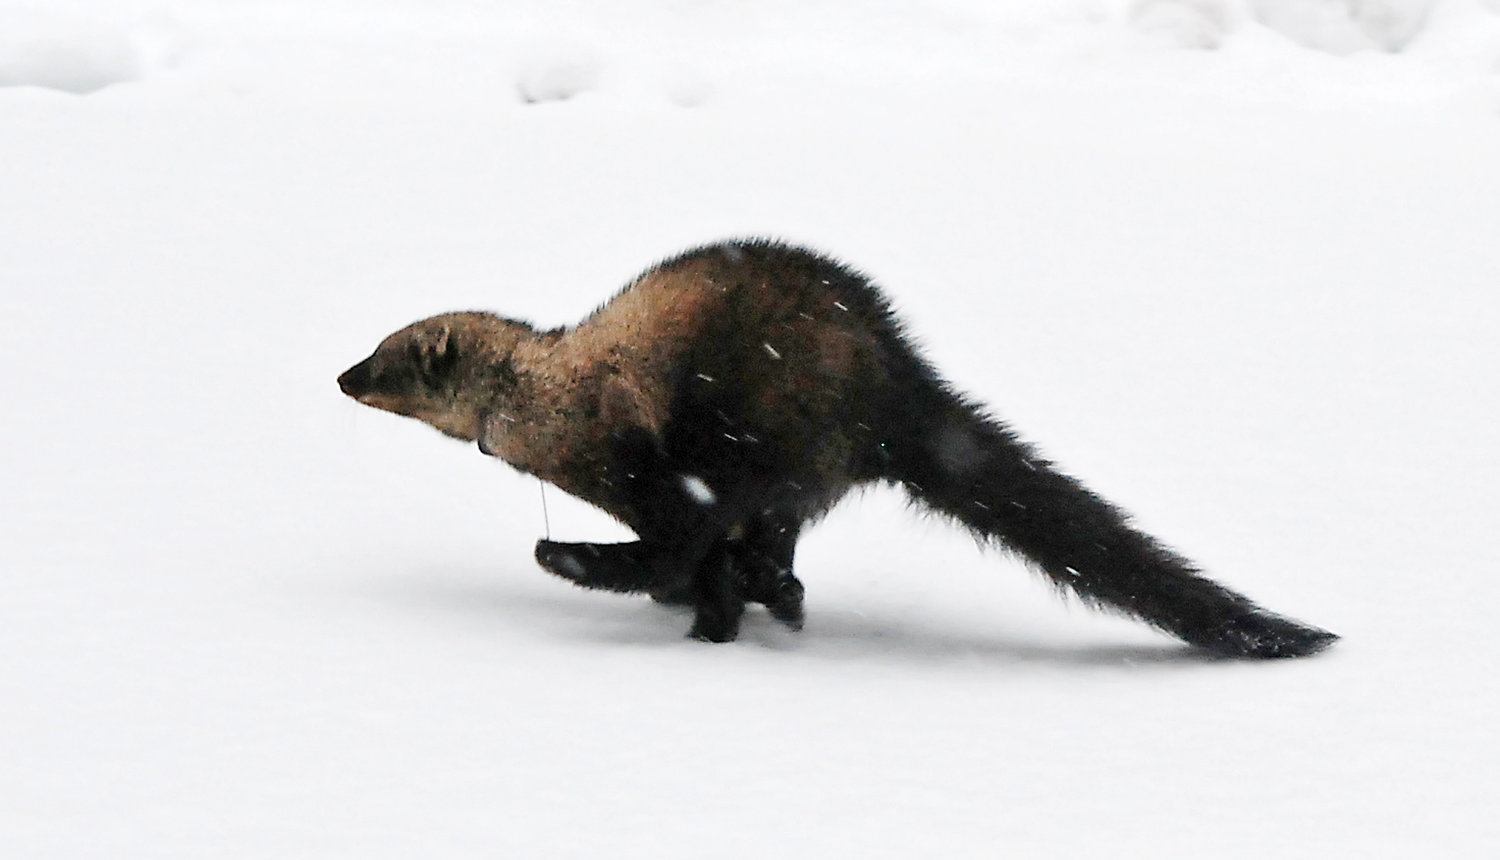 In this photo shot Dec. 21, 2008 and released by the National Park Service, a female fisher runs across a snow field after being released in the Sol Duc Valley of Olympic National Park, Wash.